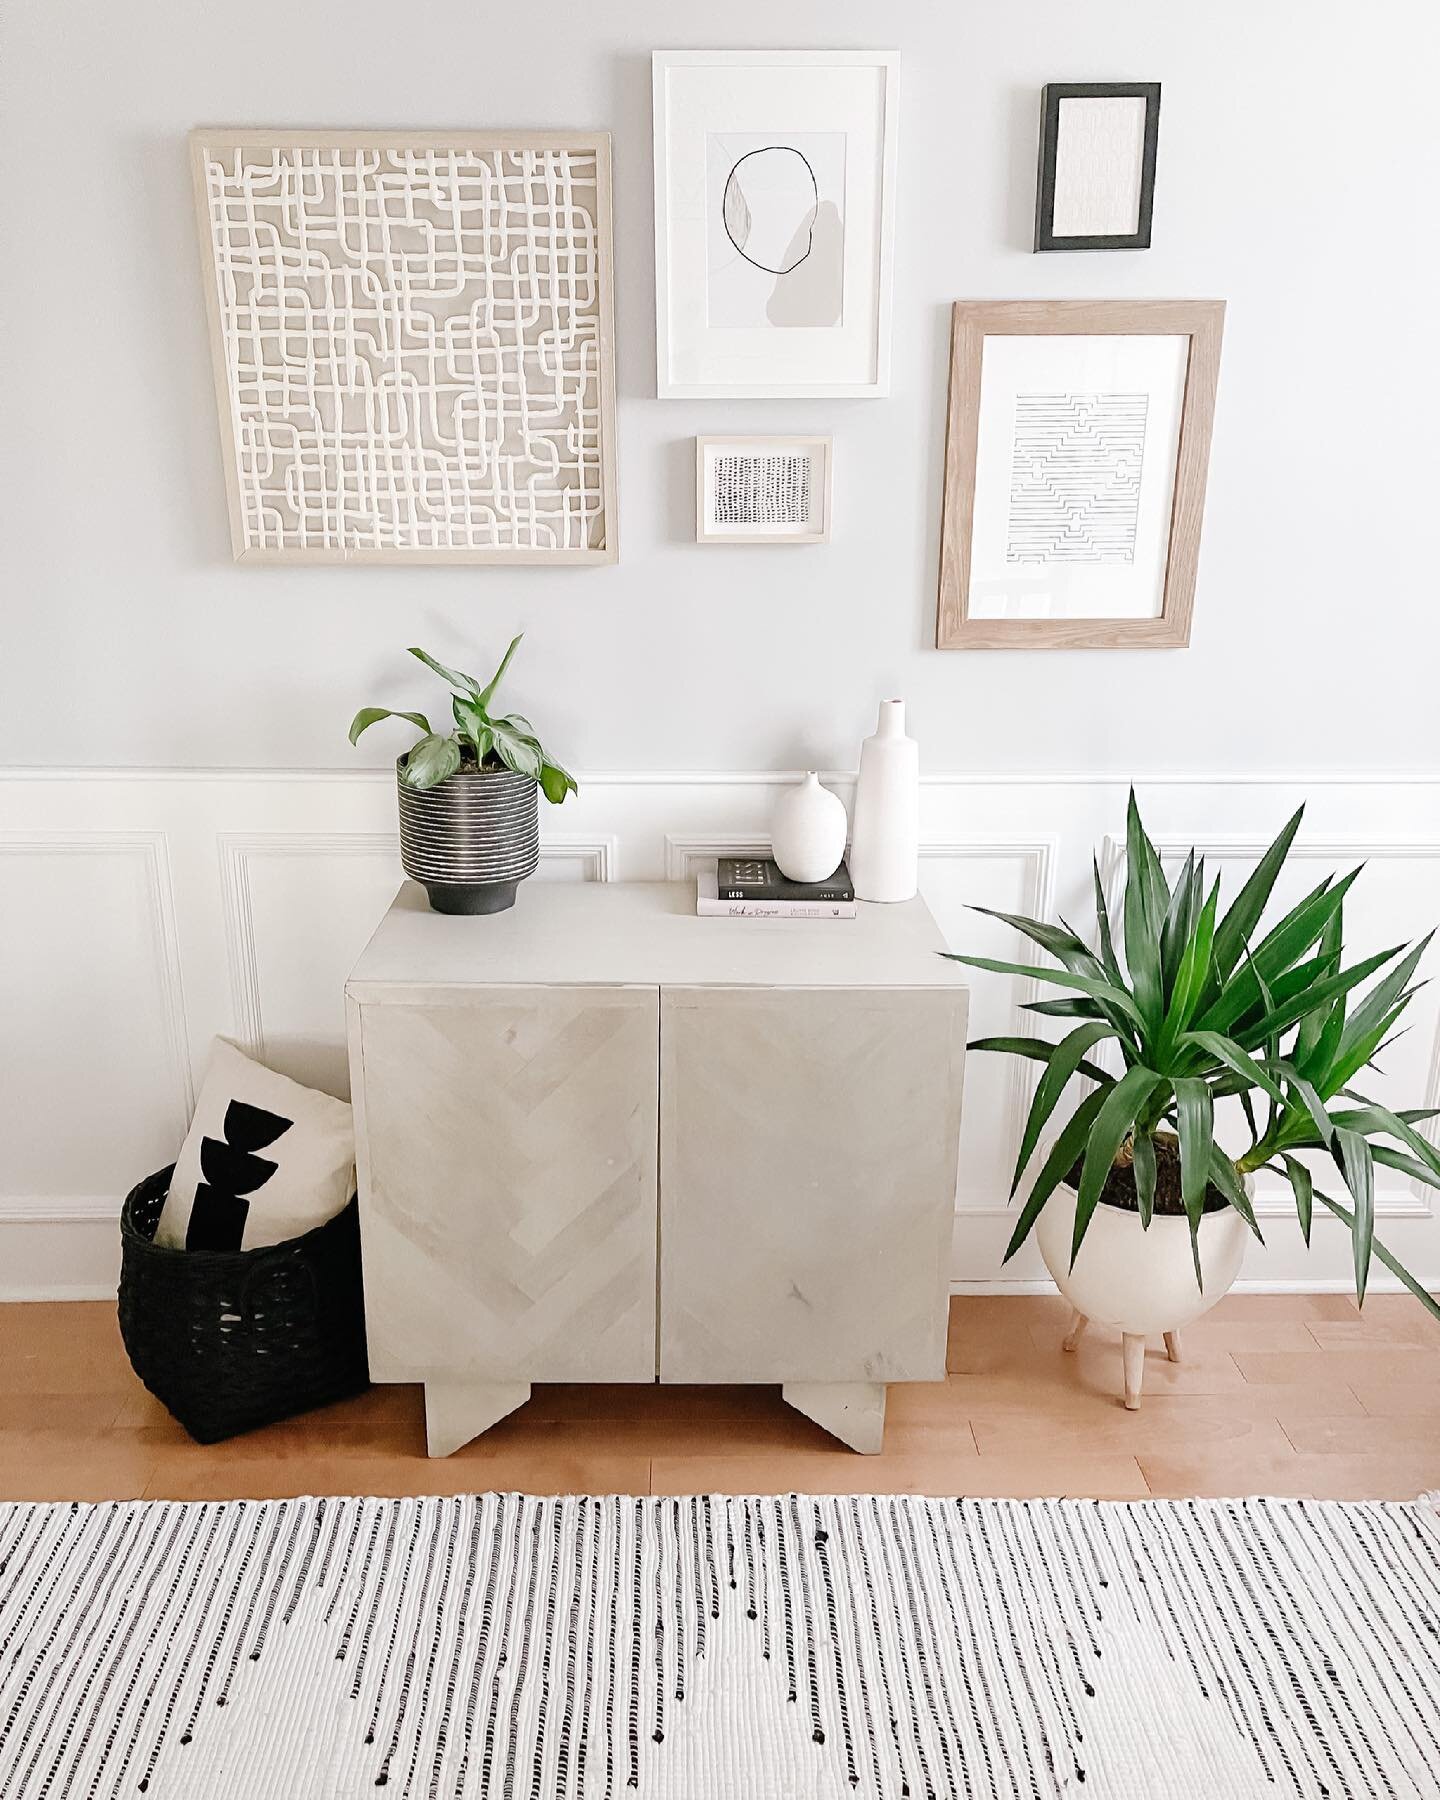 Raise your hand if you&rsquo;ve ever been personally victimized by in-cohesive home decor 🙋&zwj;♀️

Don&rsquo;t be shy - you&rsquo;re not alone! I have too. 

But as I&rsquo;ve gotten to understand my design aesthetic better I&rsquo;ve found my deco